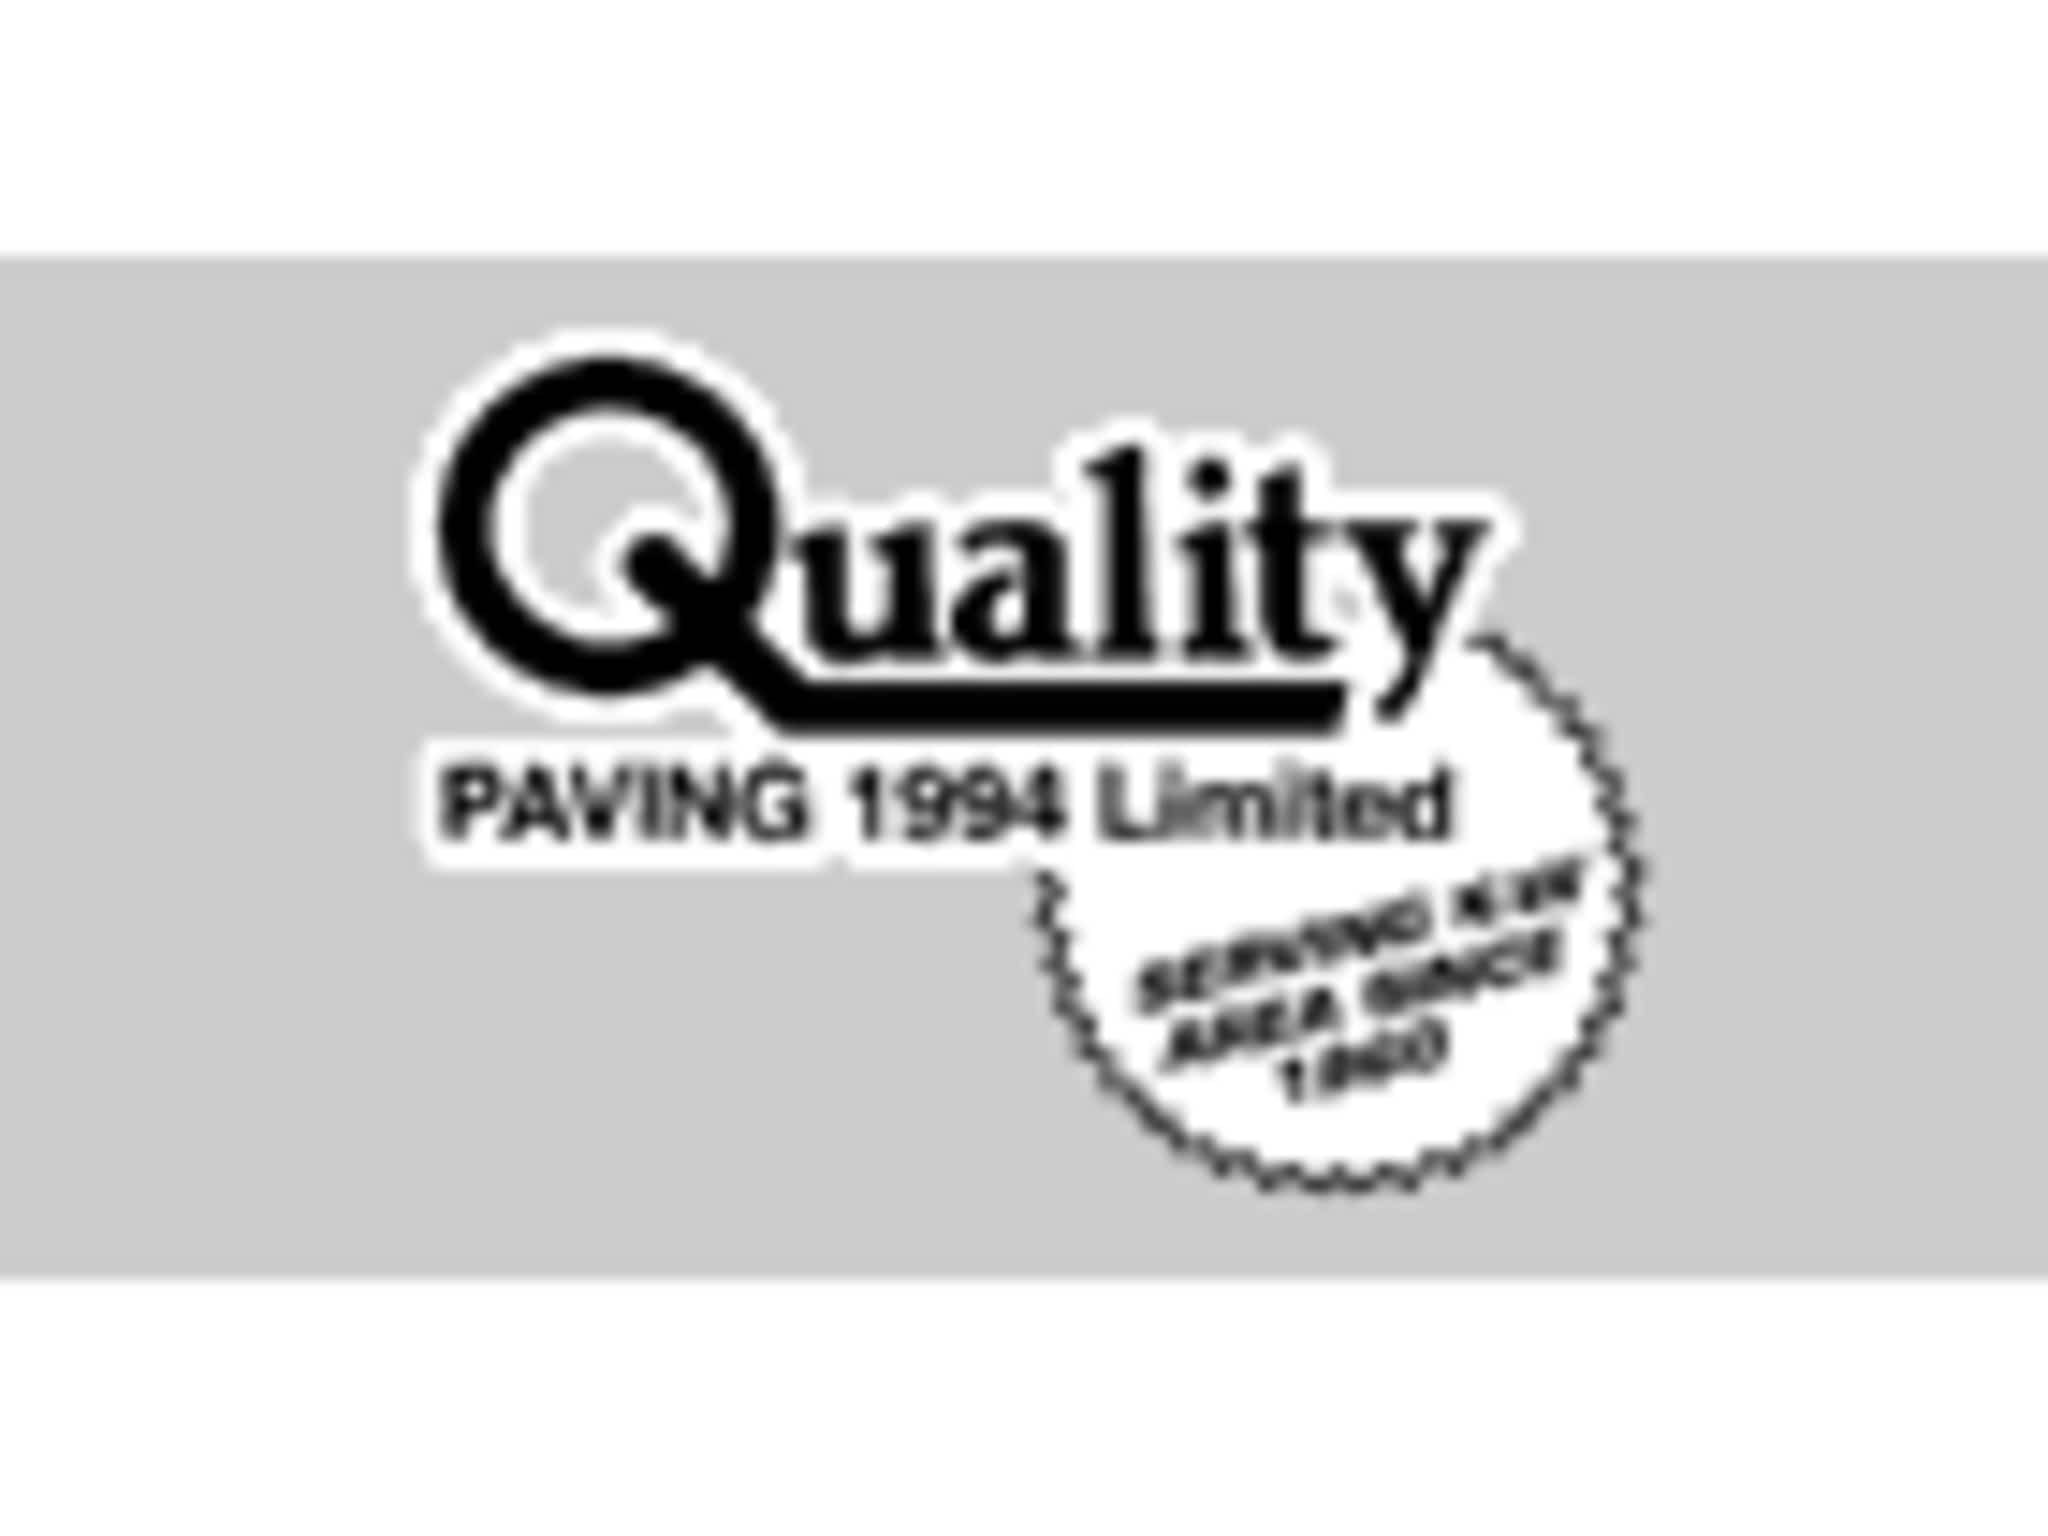 photo Quality Paving 1994 Limited